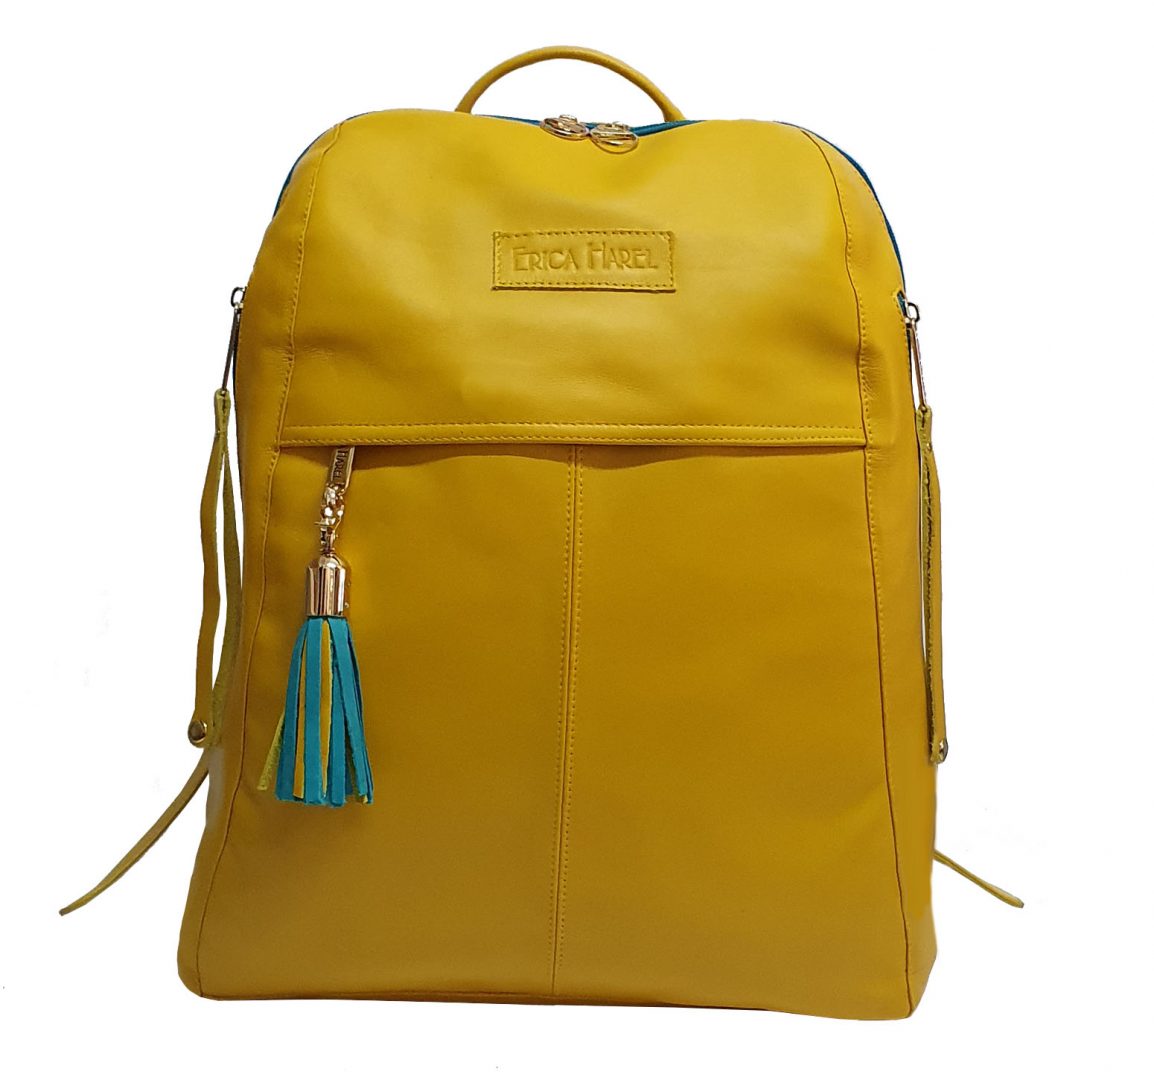 Braccialini Lola Leather Backpack Yellow - Buy At Outlet Prices!